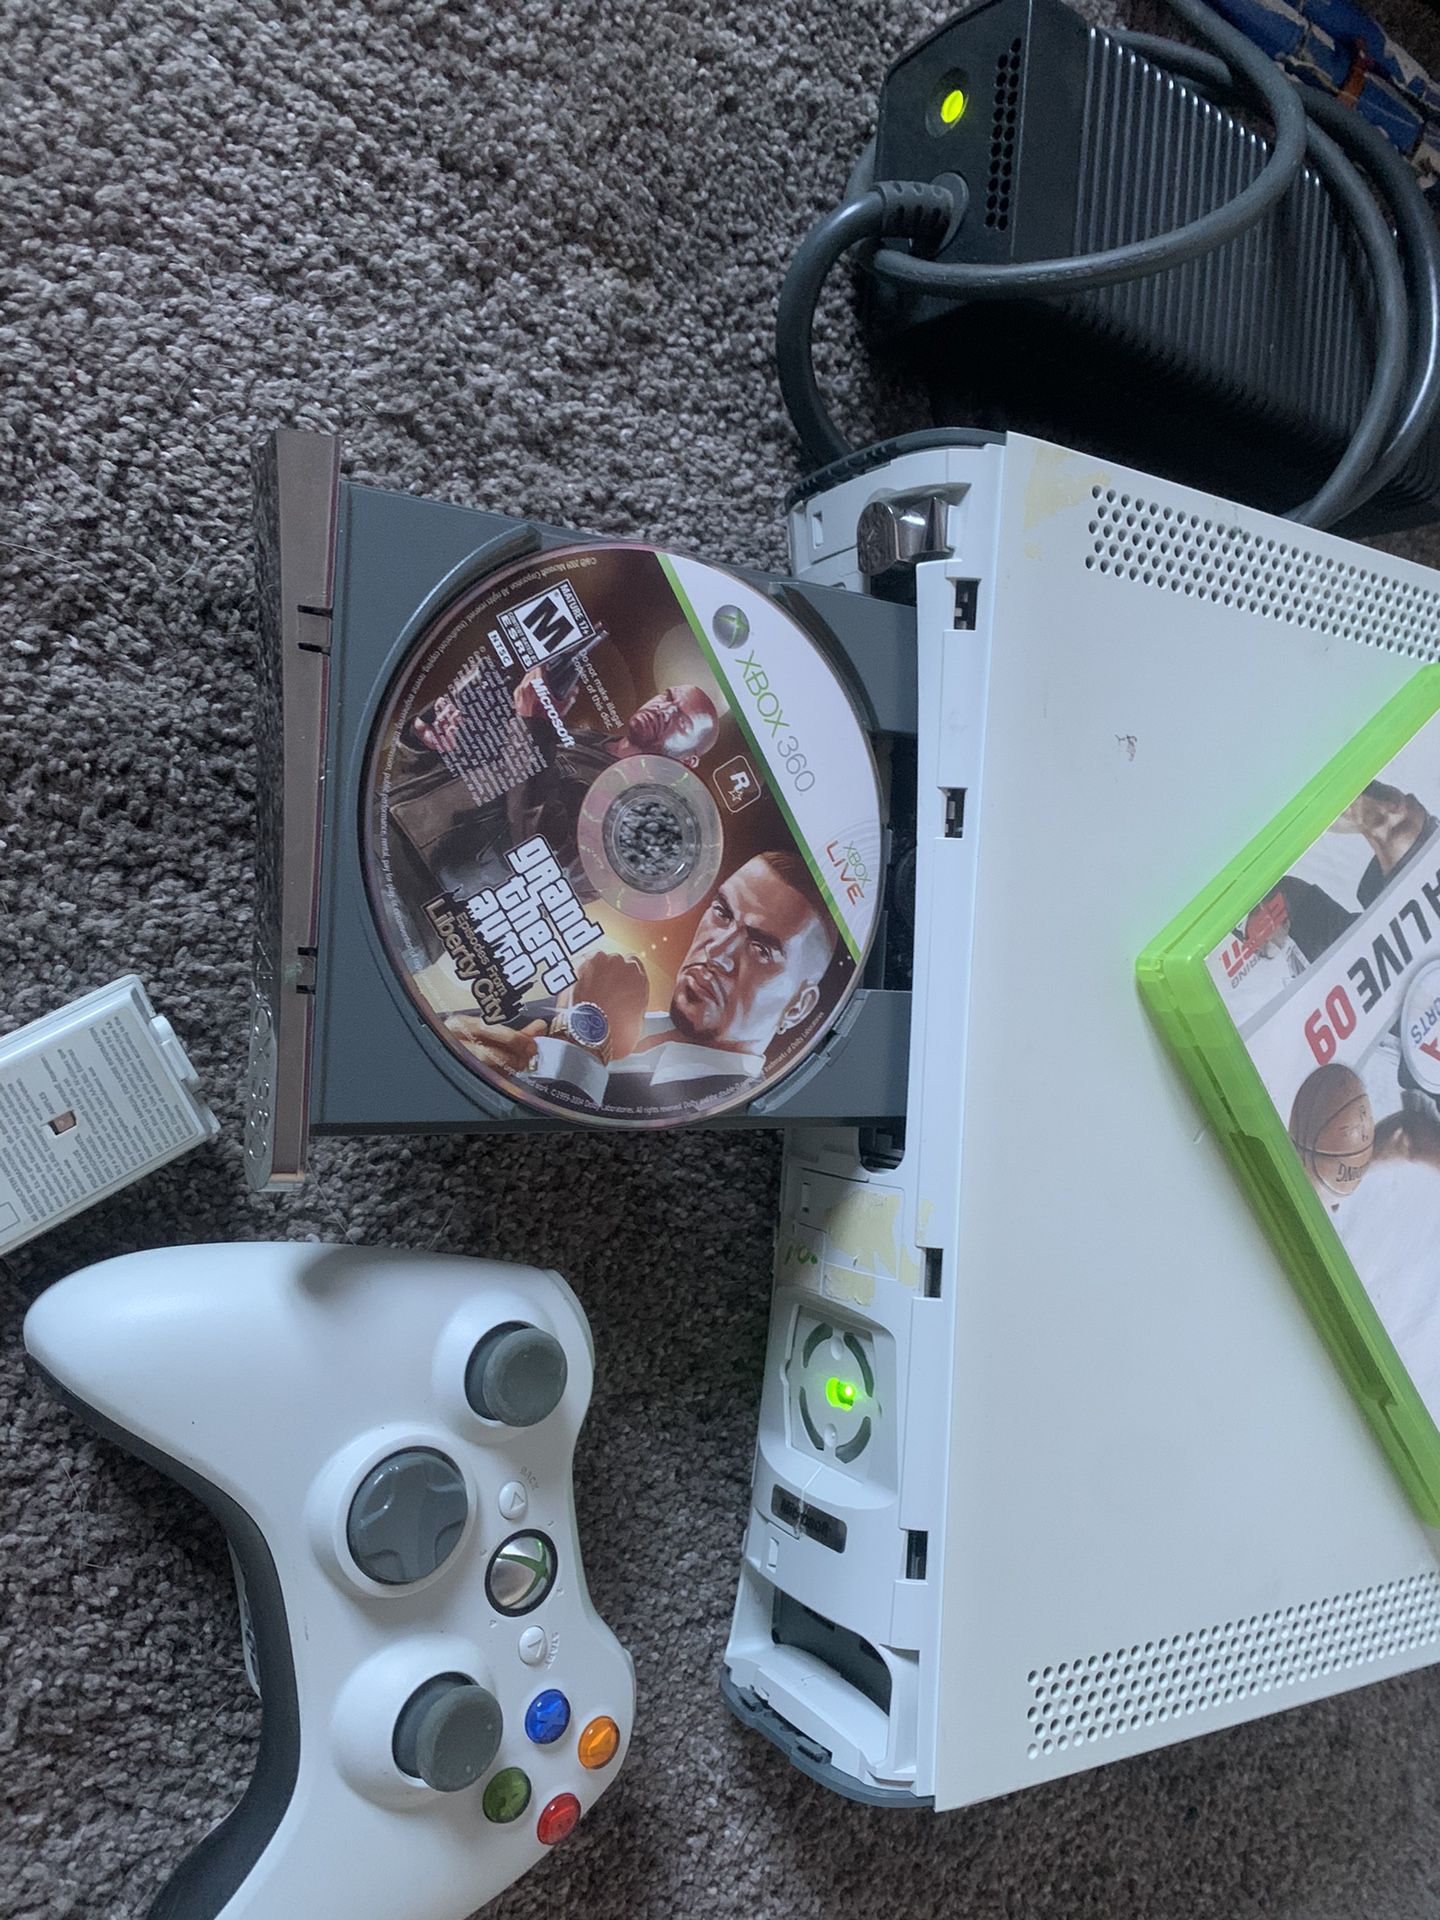 Xbox 360 console with grand theft auto liberty city